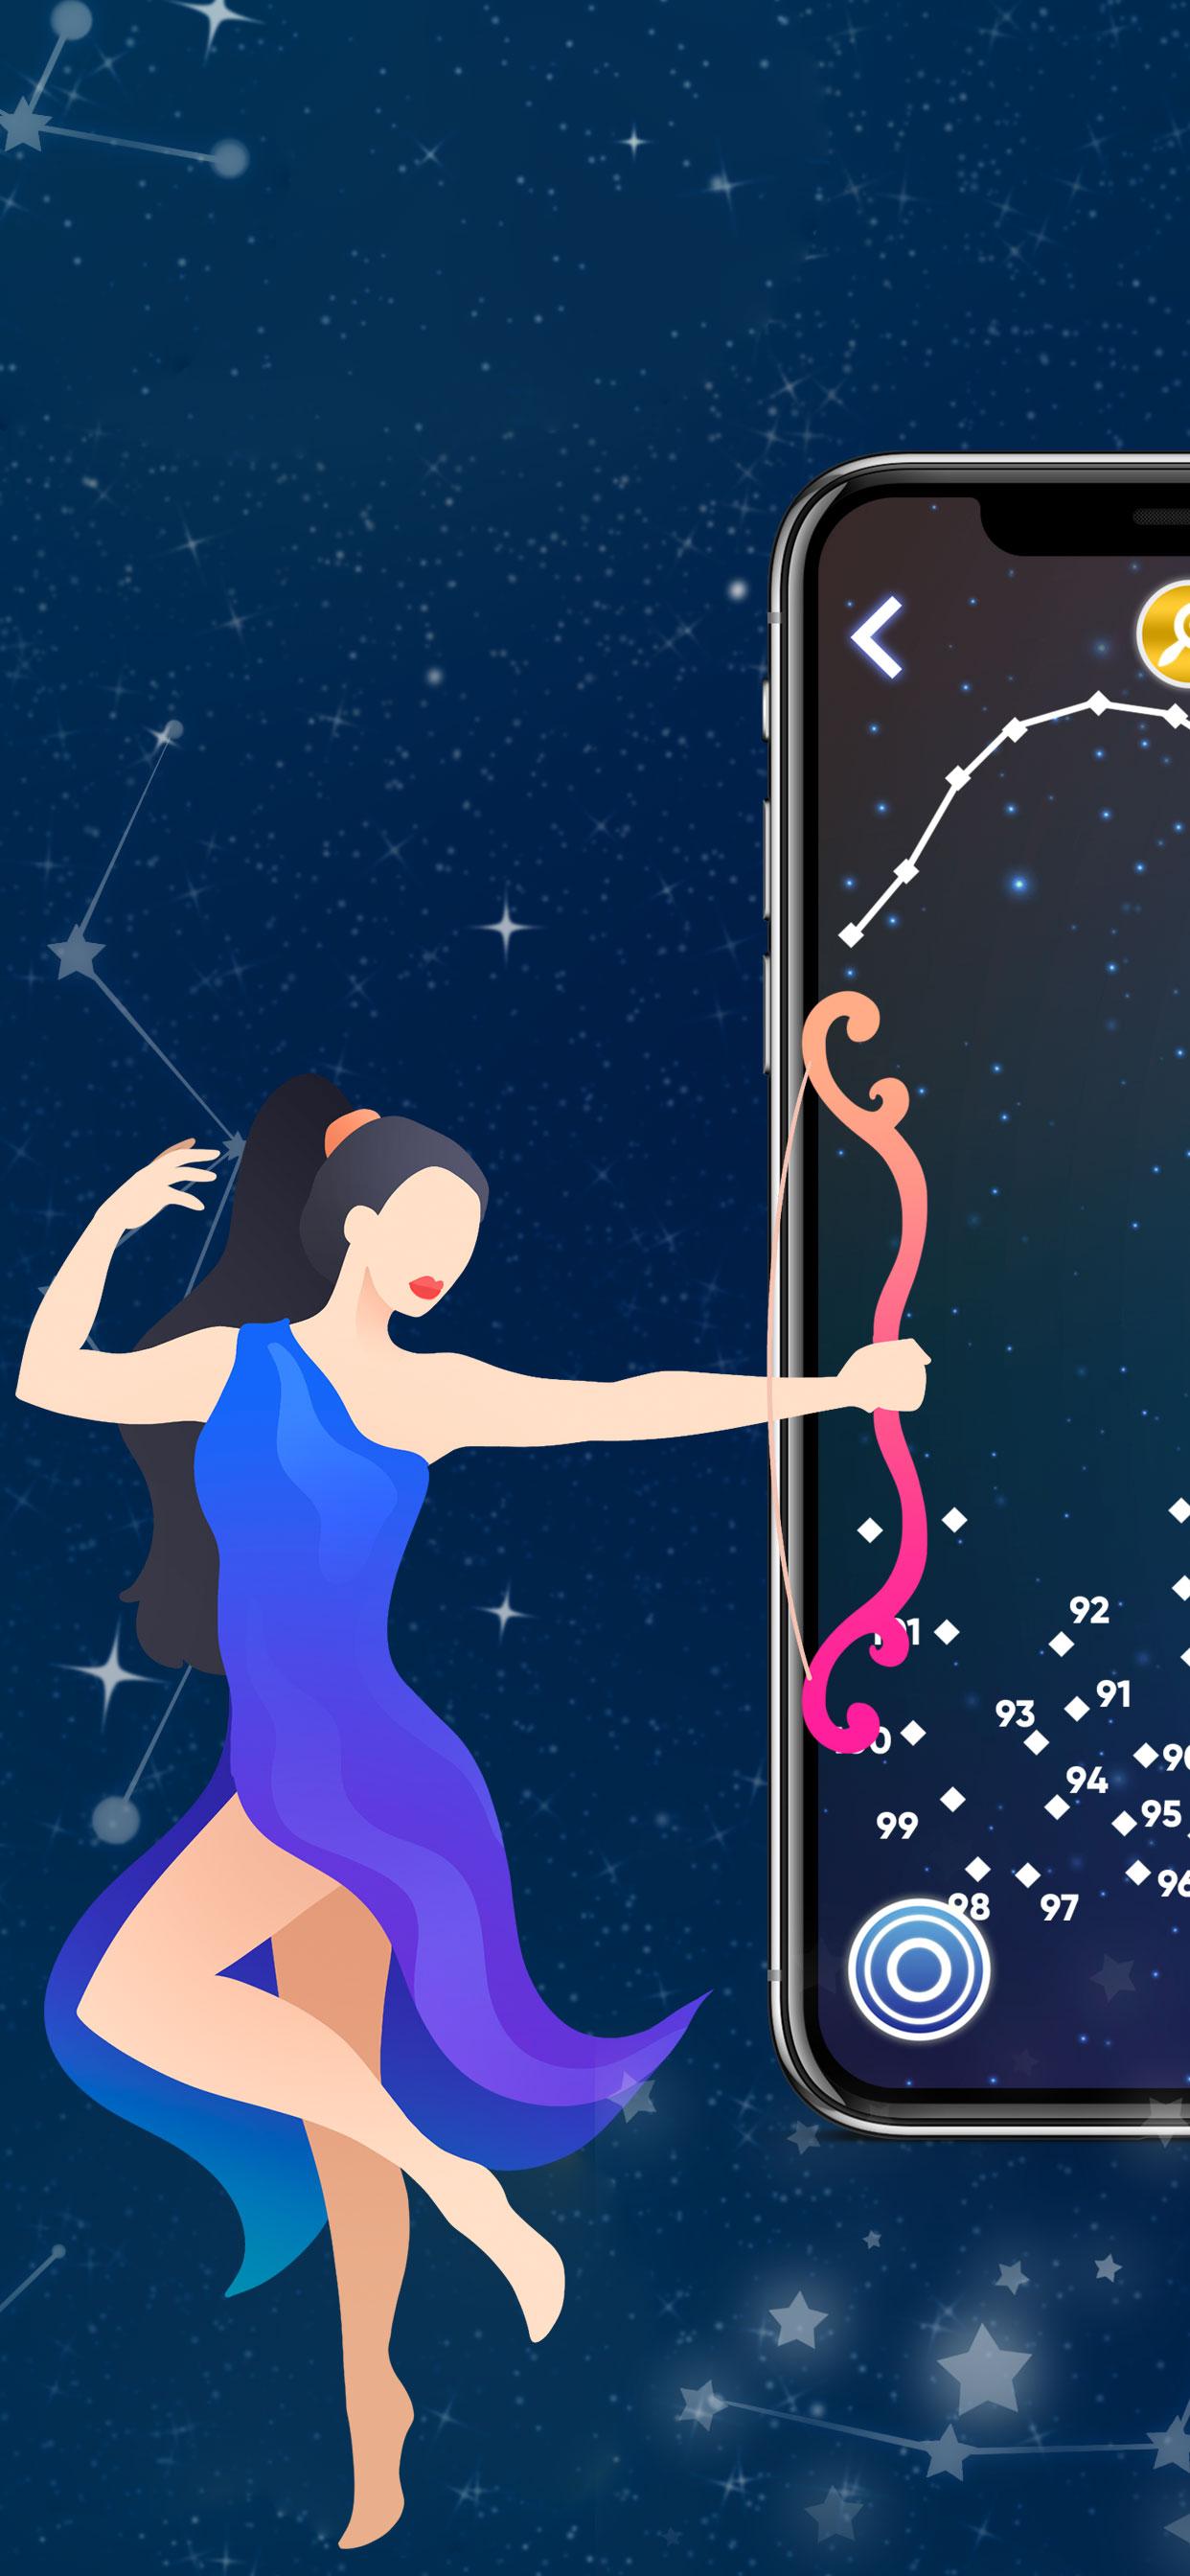 connect-the-dots-for-adults-apk-for-android-download